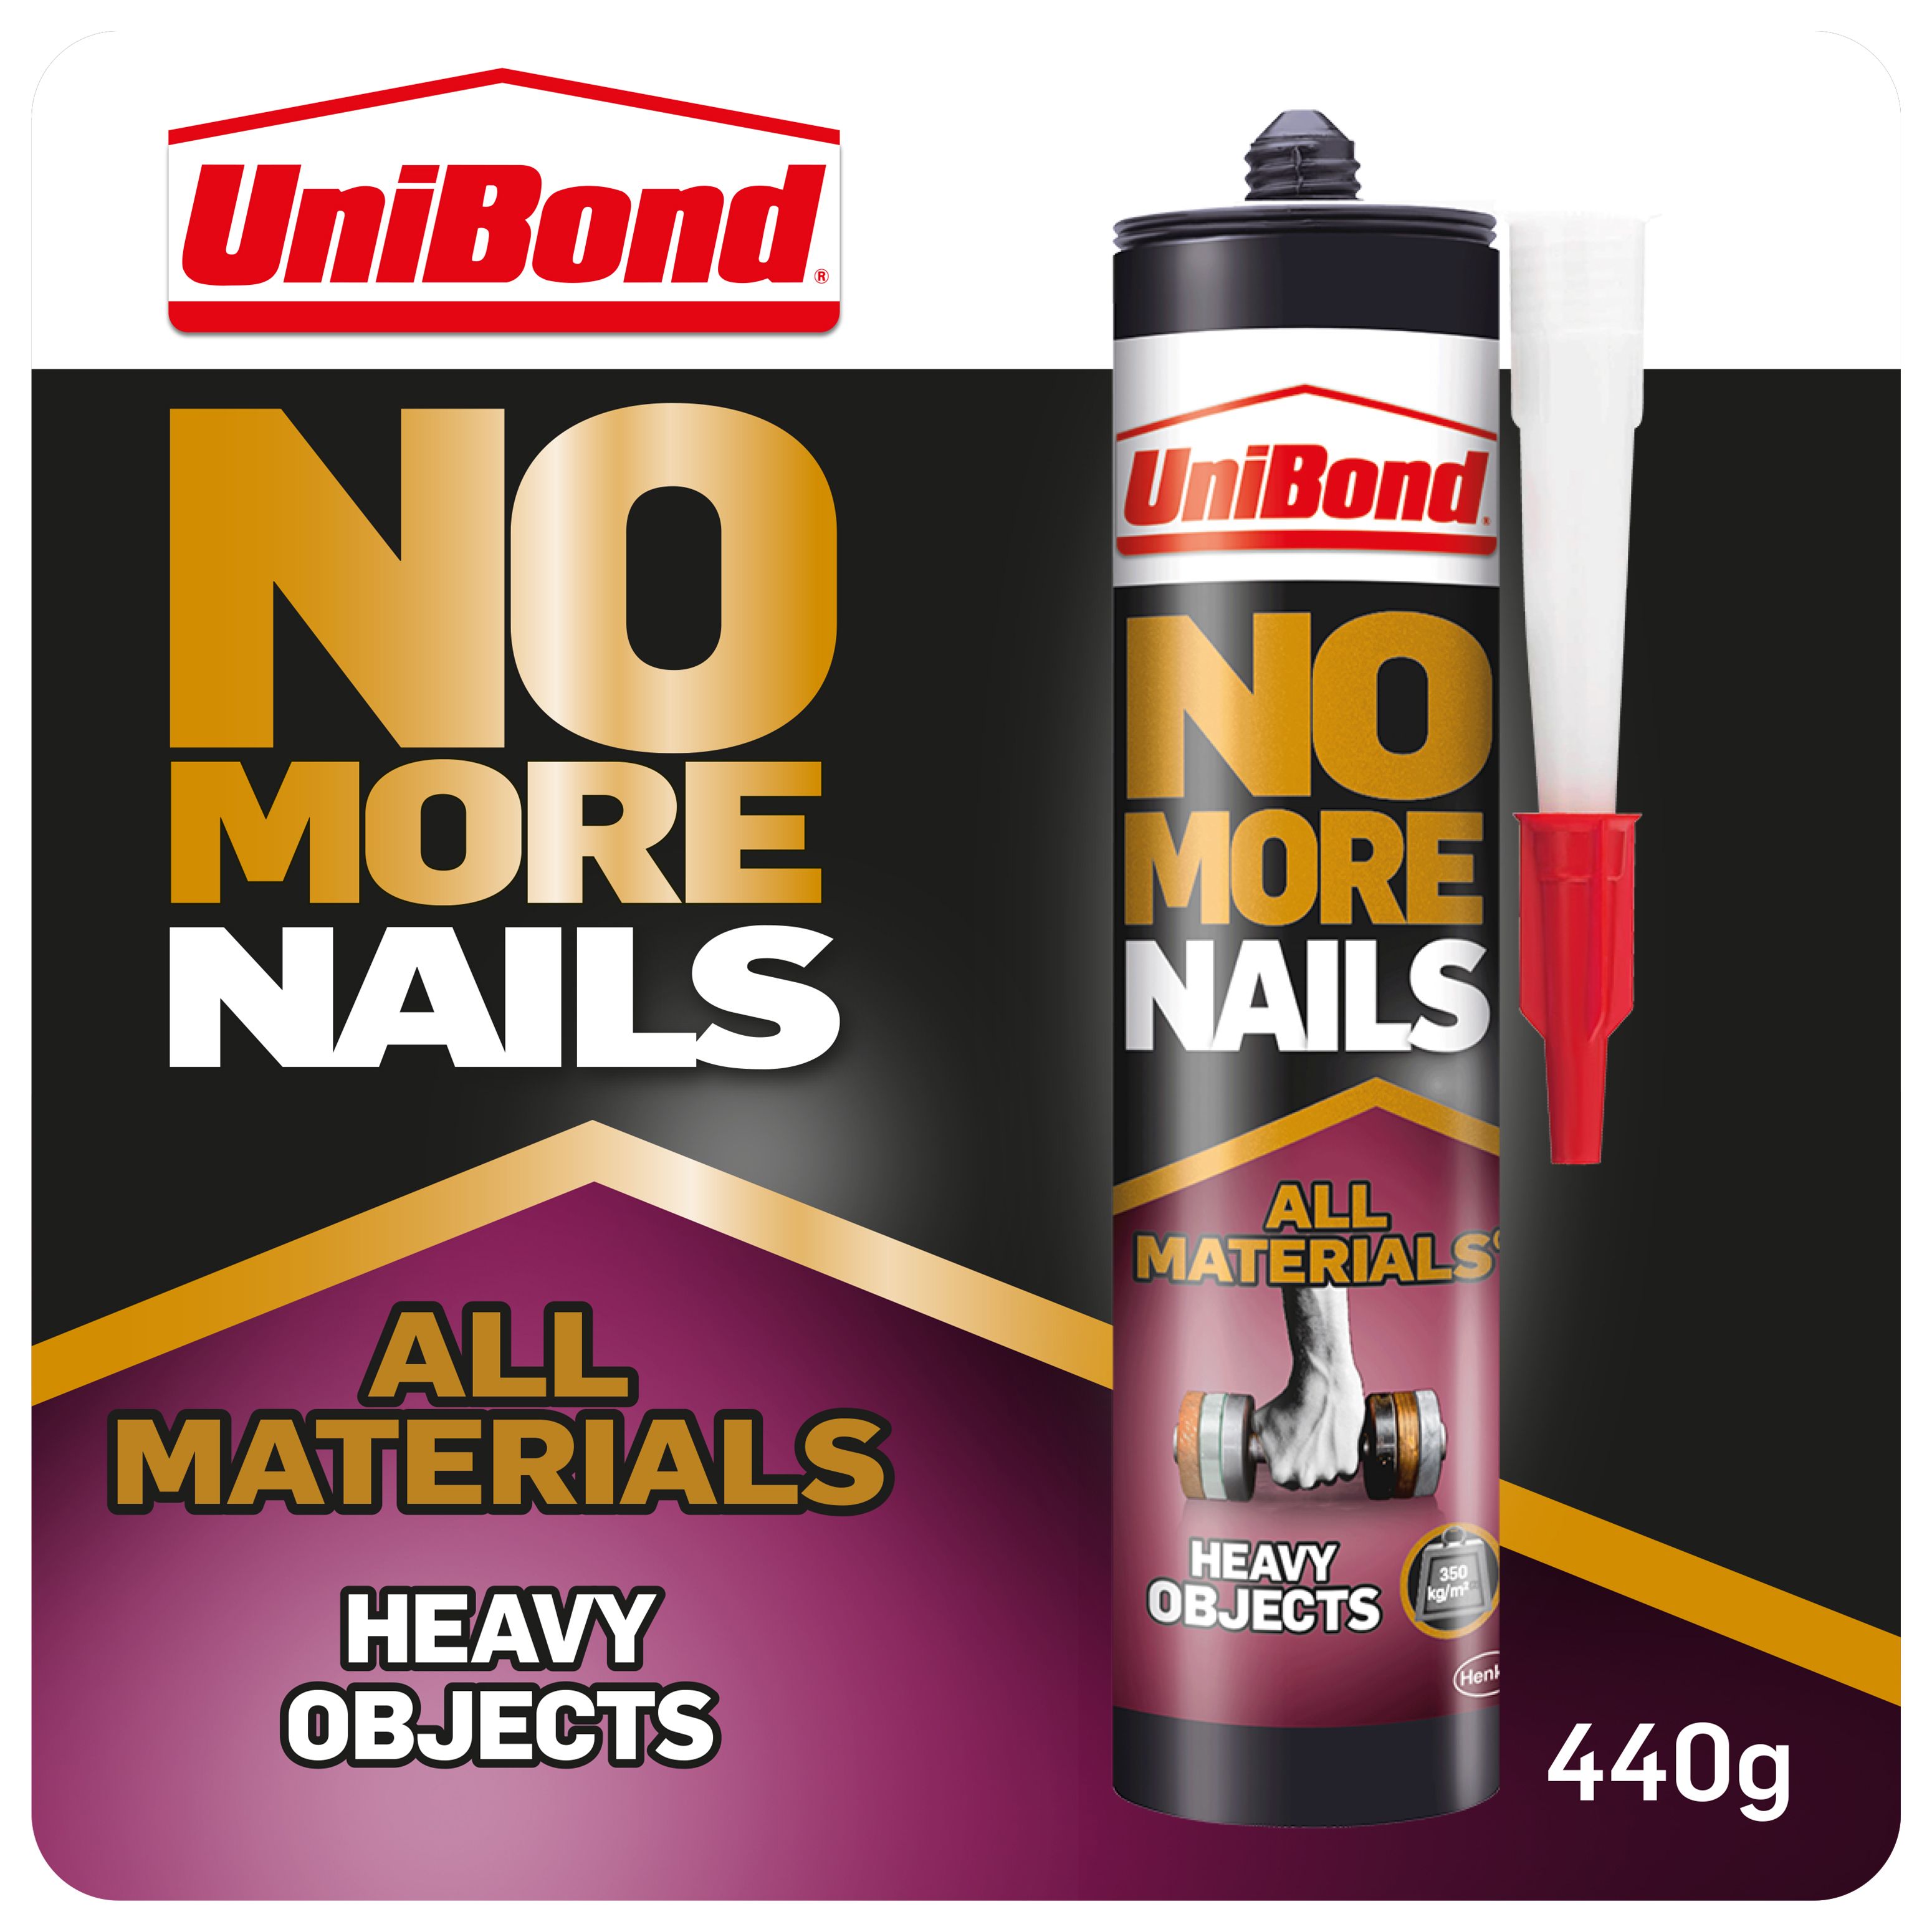 Image of Unibond No More Nails All Materials Heavy Objects Cartridge - 440g